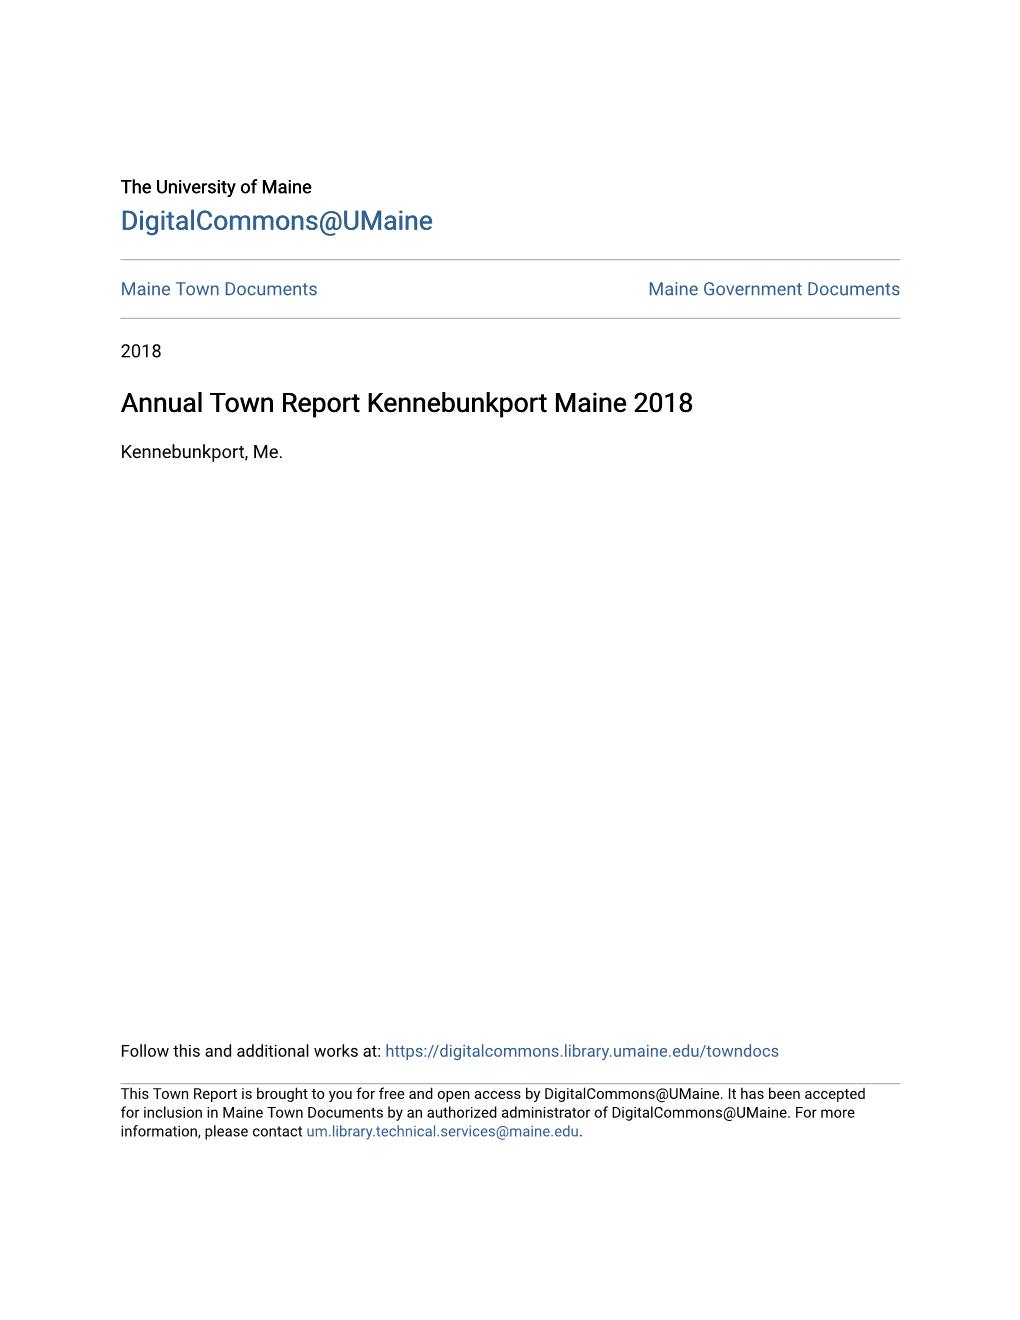 Annual Town Report Kennebunkport Maine 2018